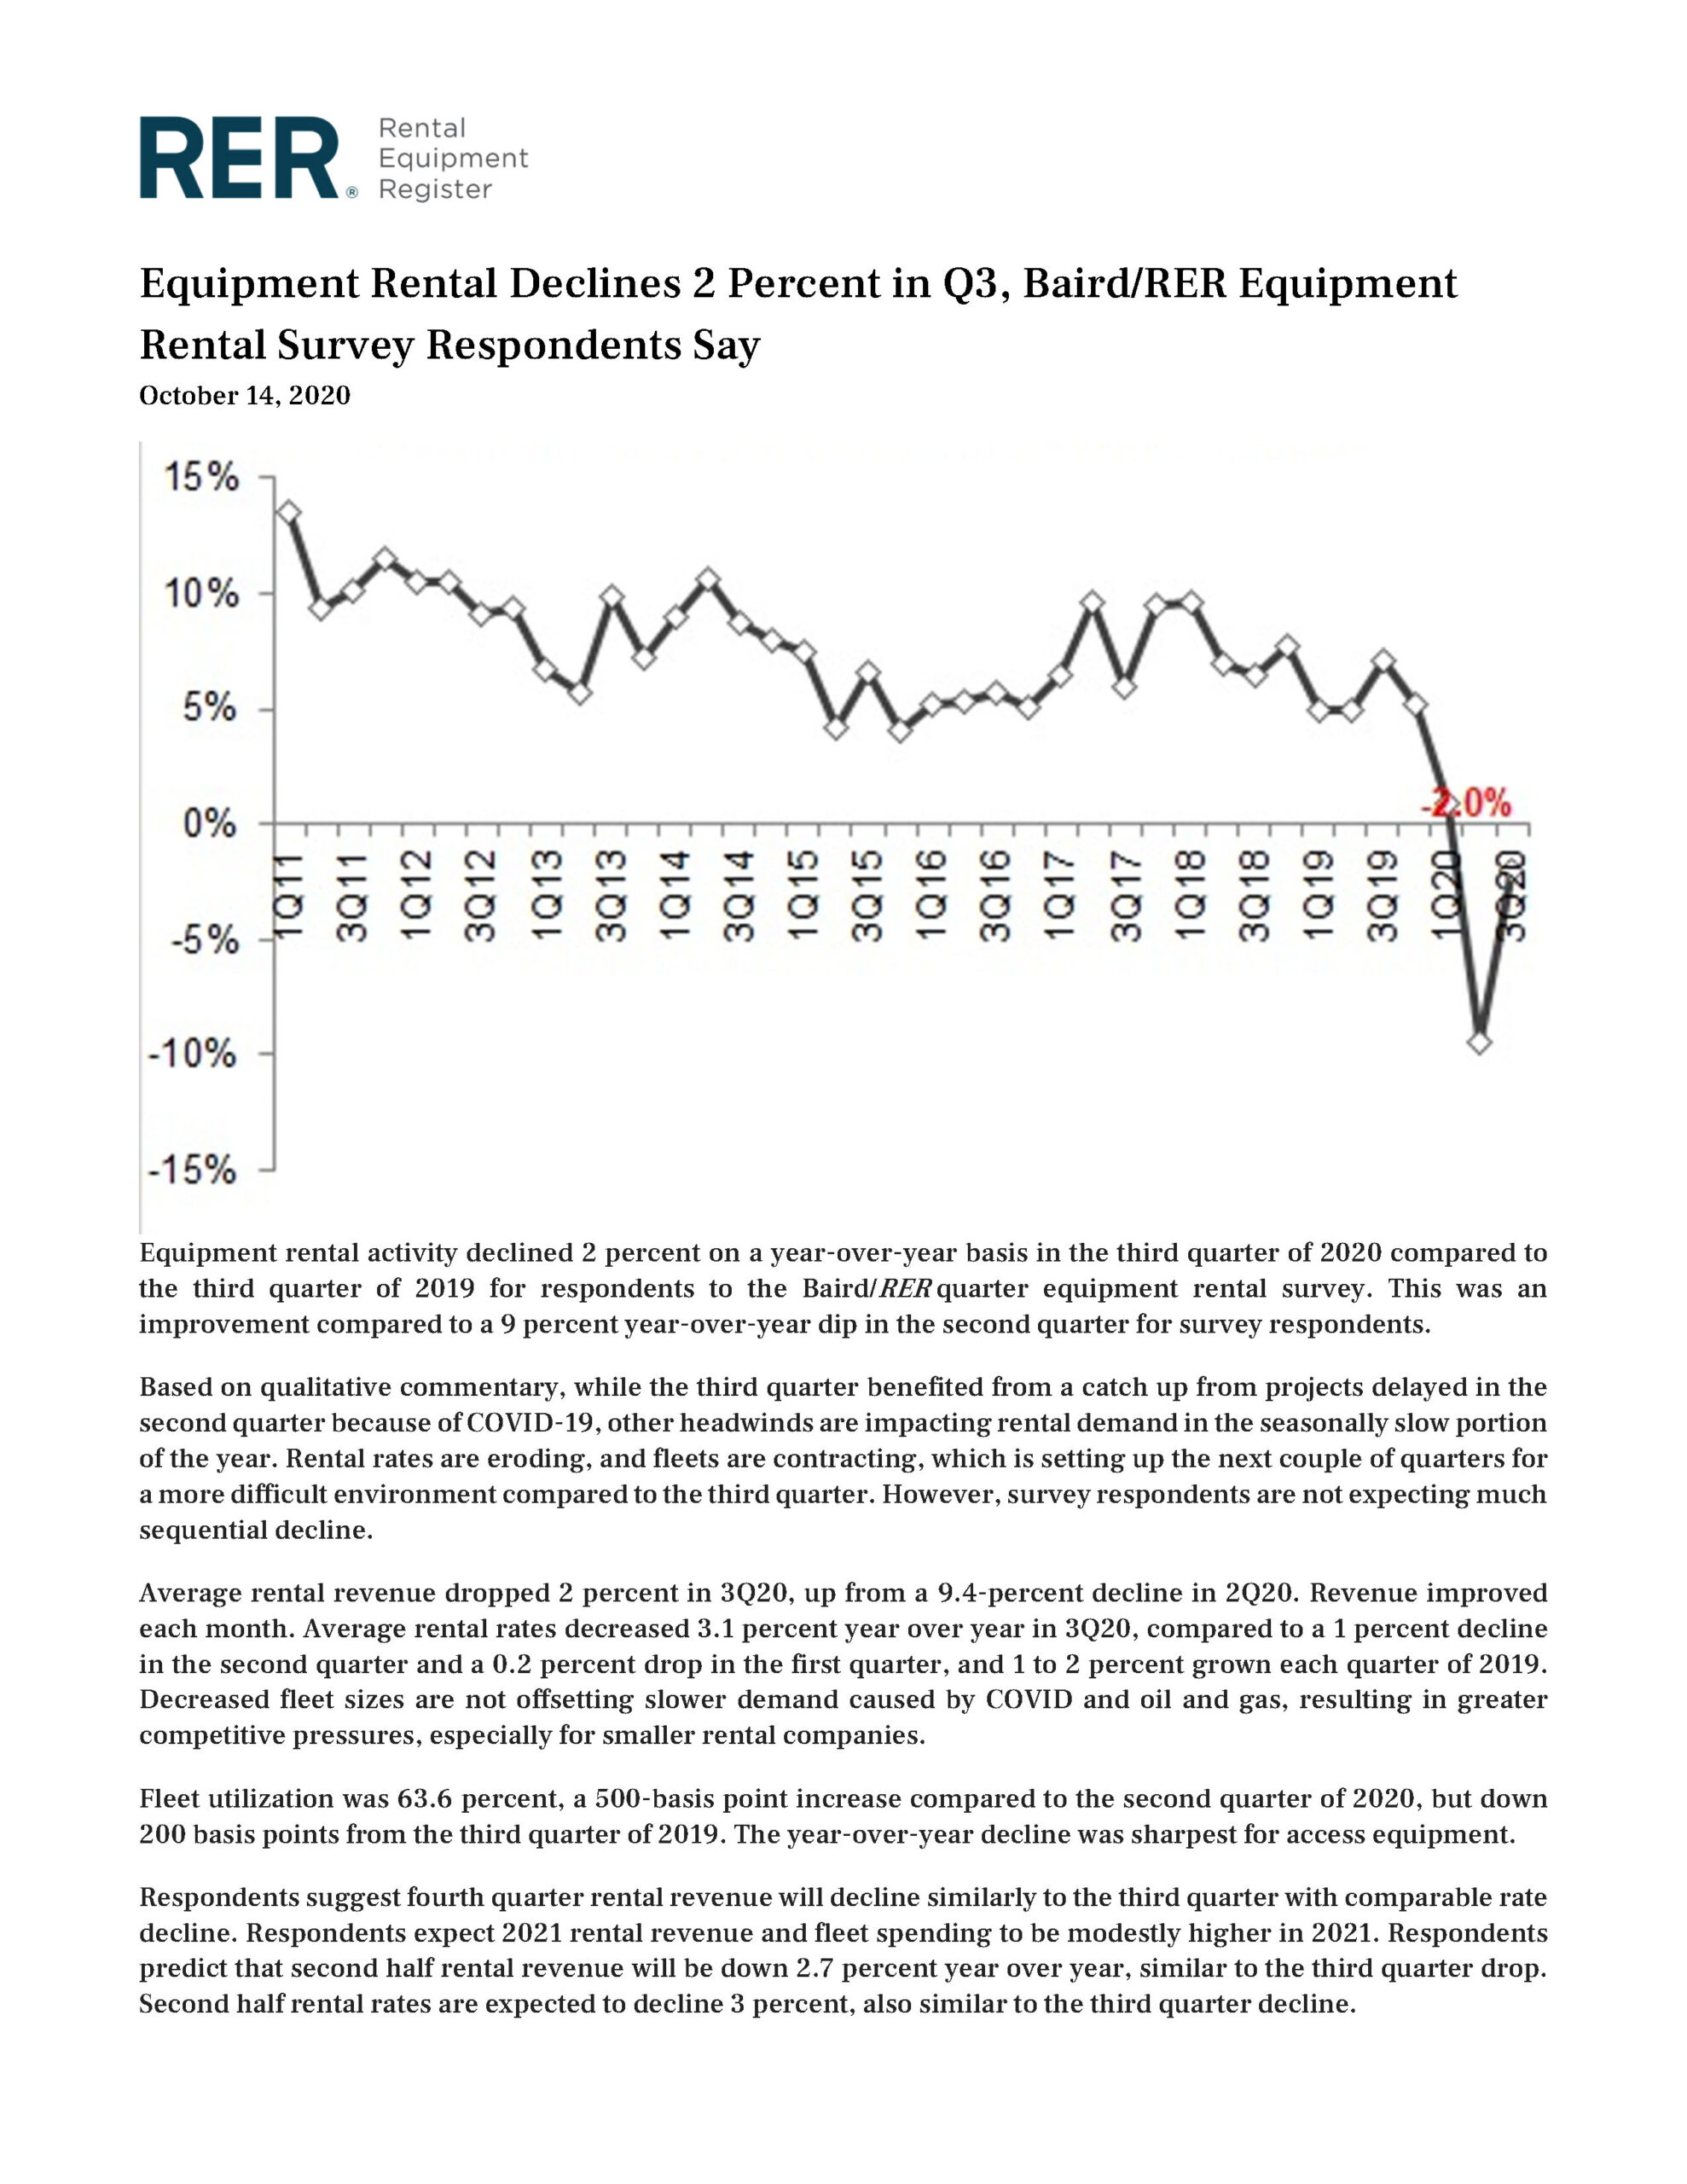 Pages from Equipment Rental Declines 2 Percent in Q3, Baird RER Equipment Rental Survey Respondents Say 10.14.2020